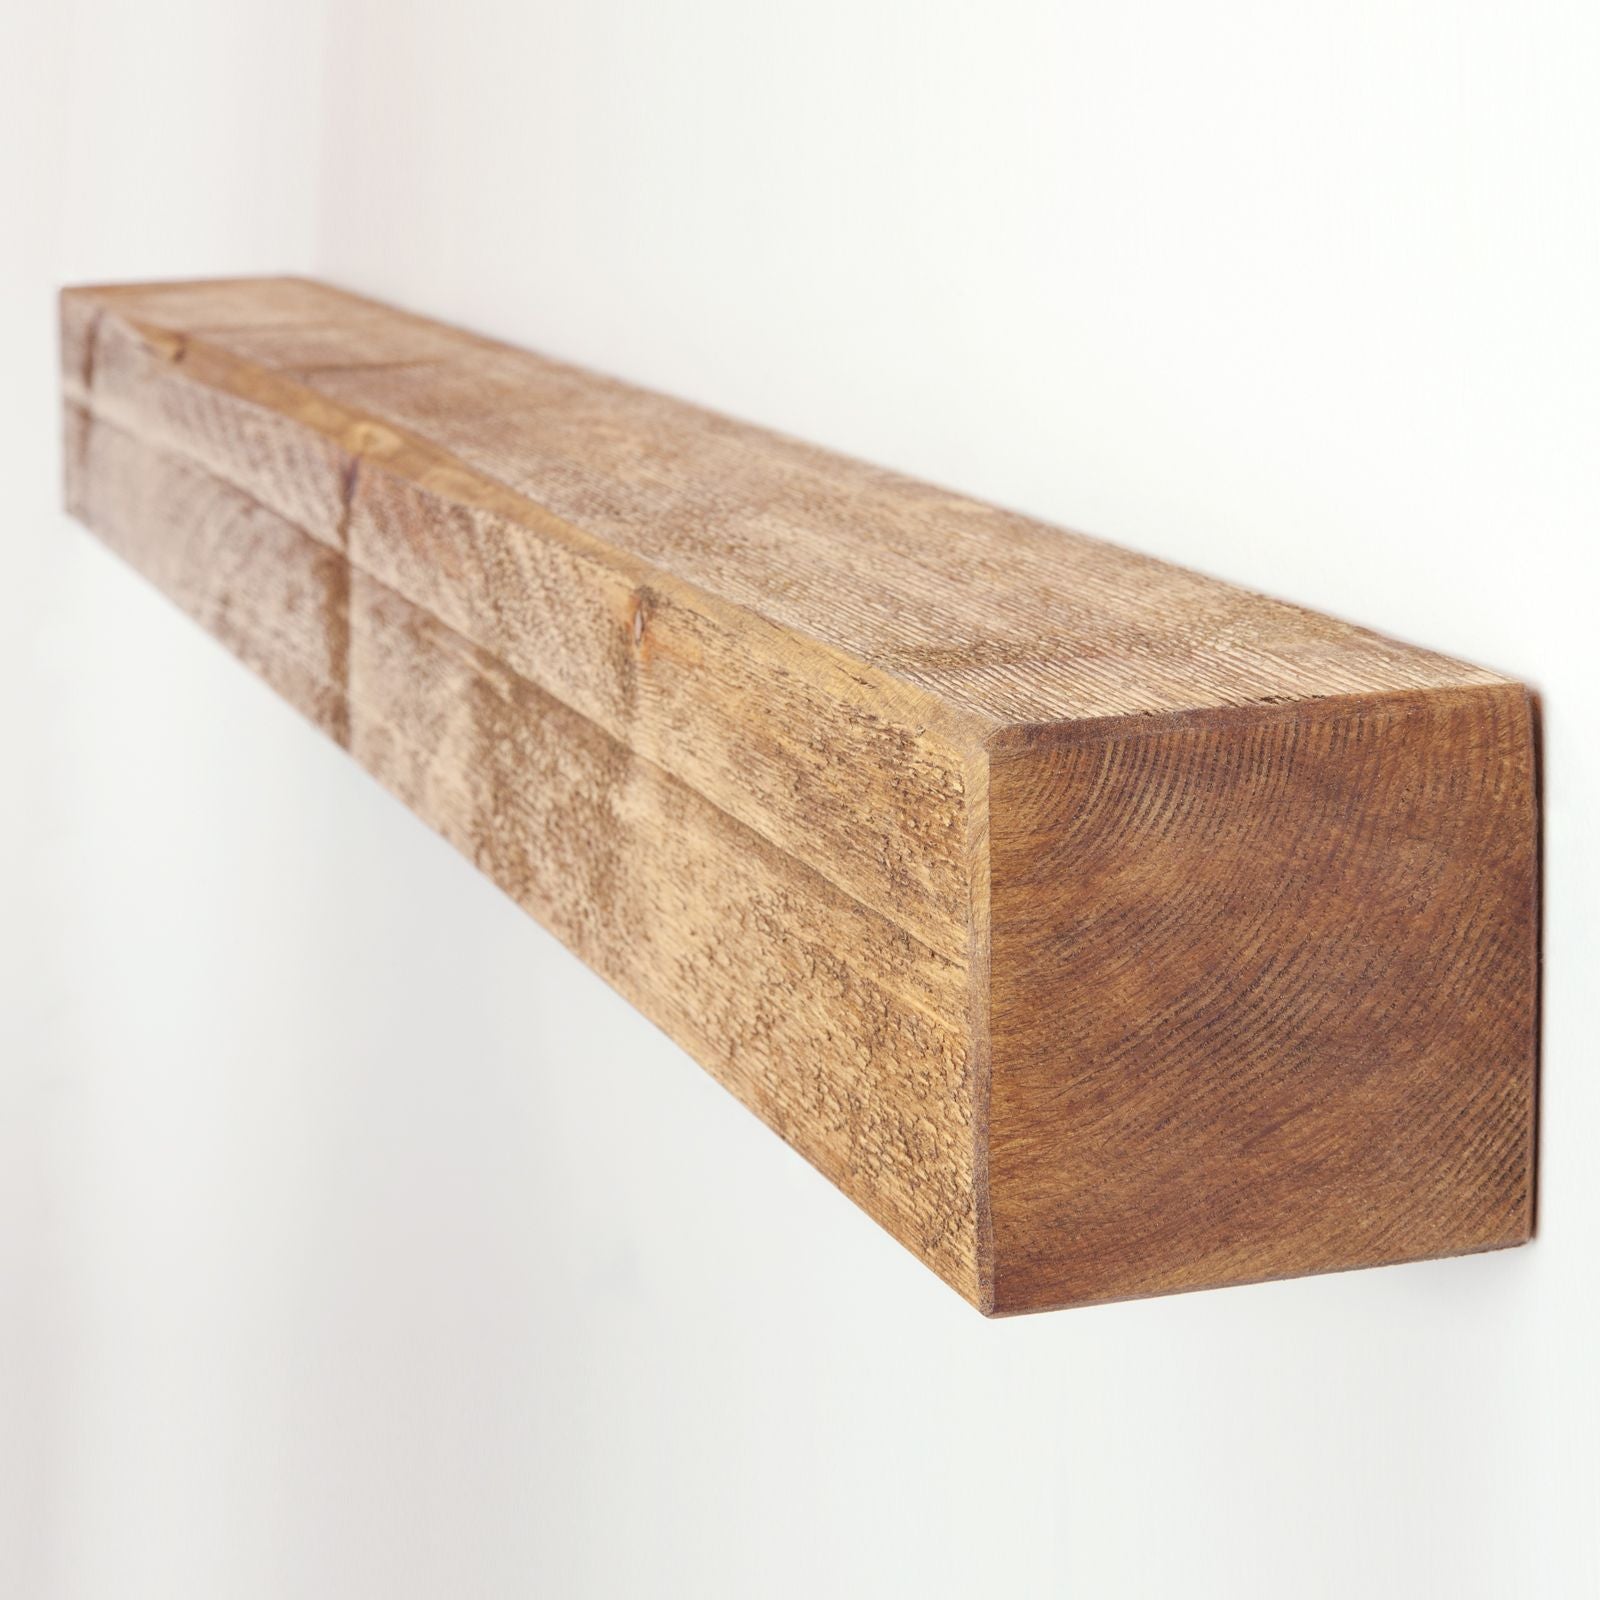 4x4 Rustic Mantel Beam - Outlet - Save 20%